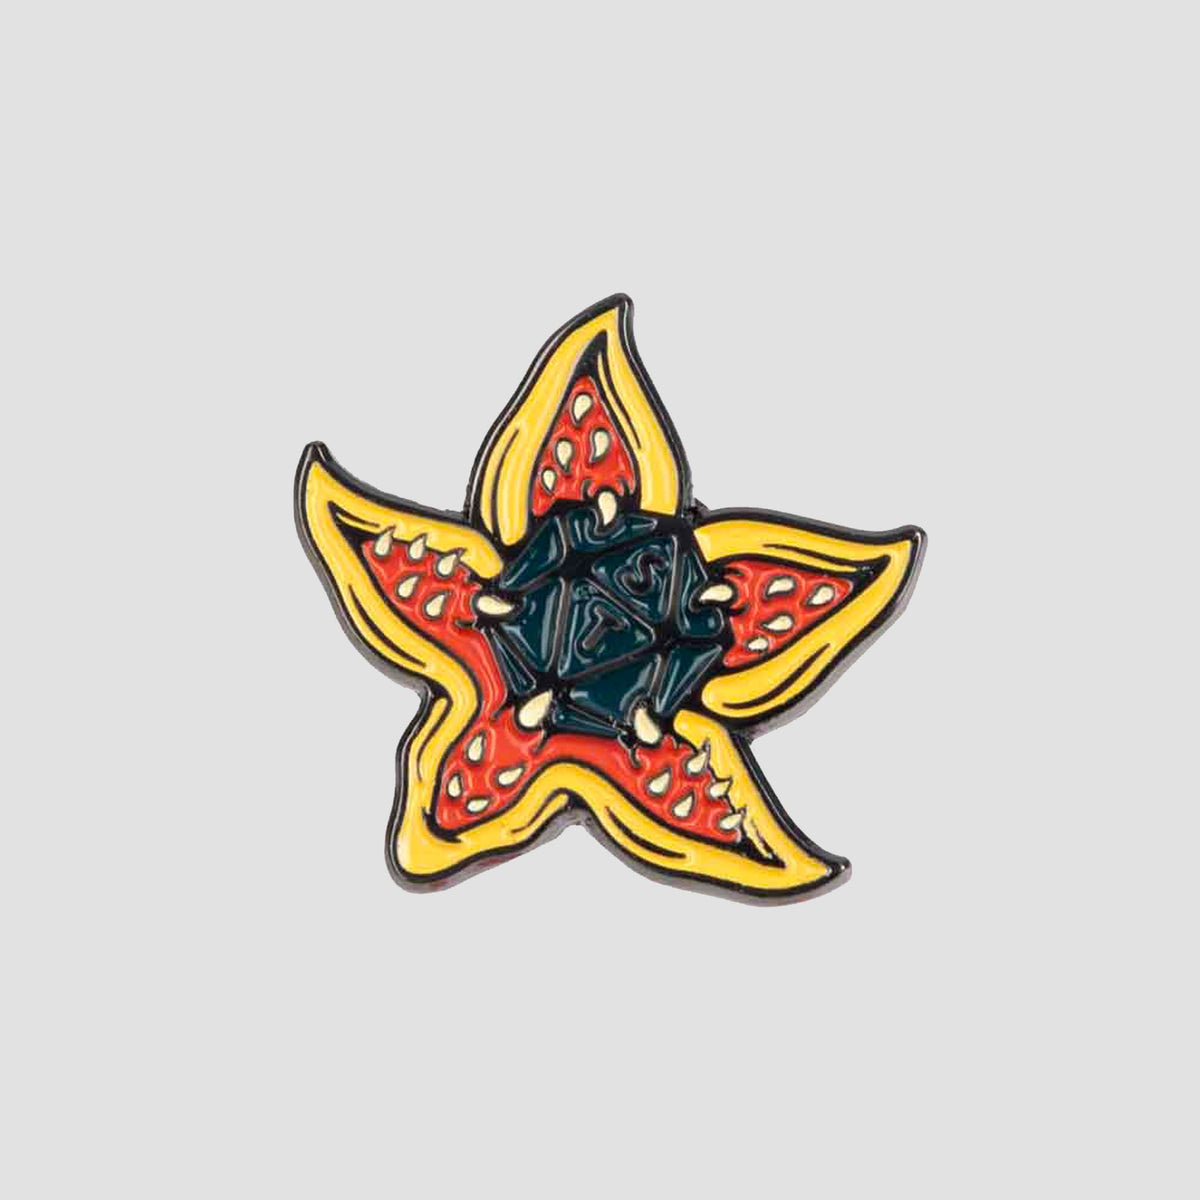 Stranger Things Tv Pin for Sale by CrisCat